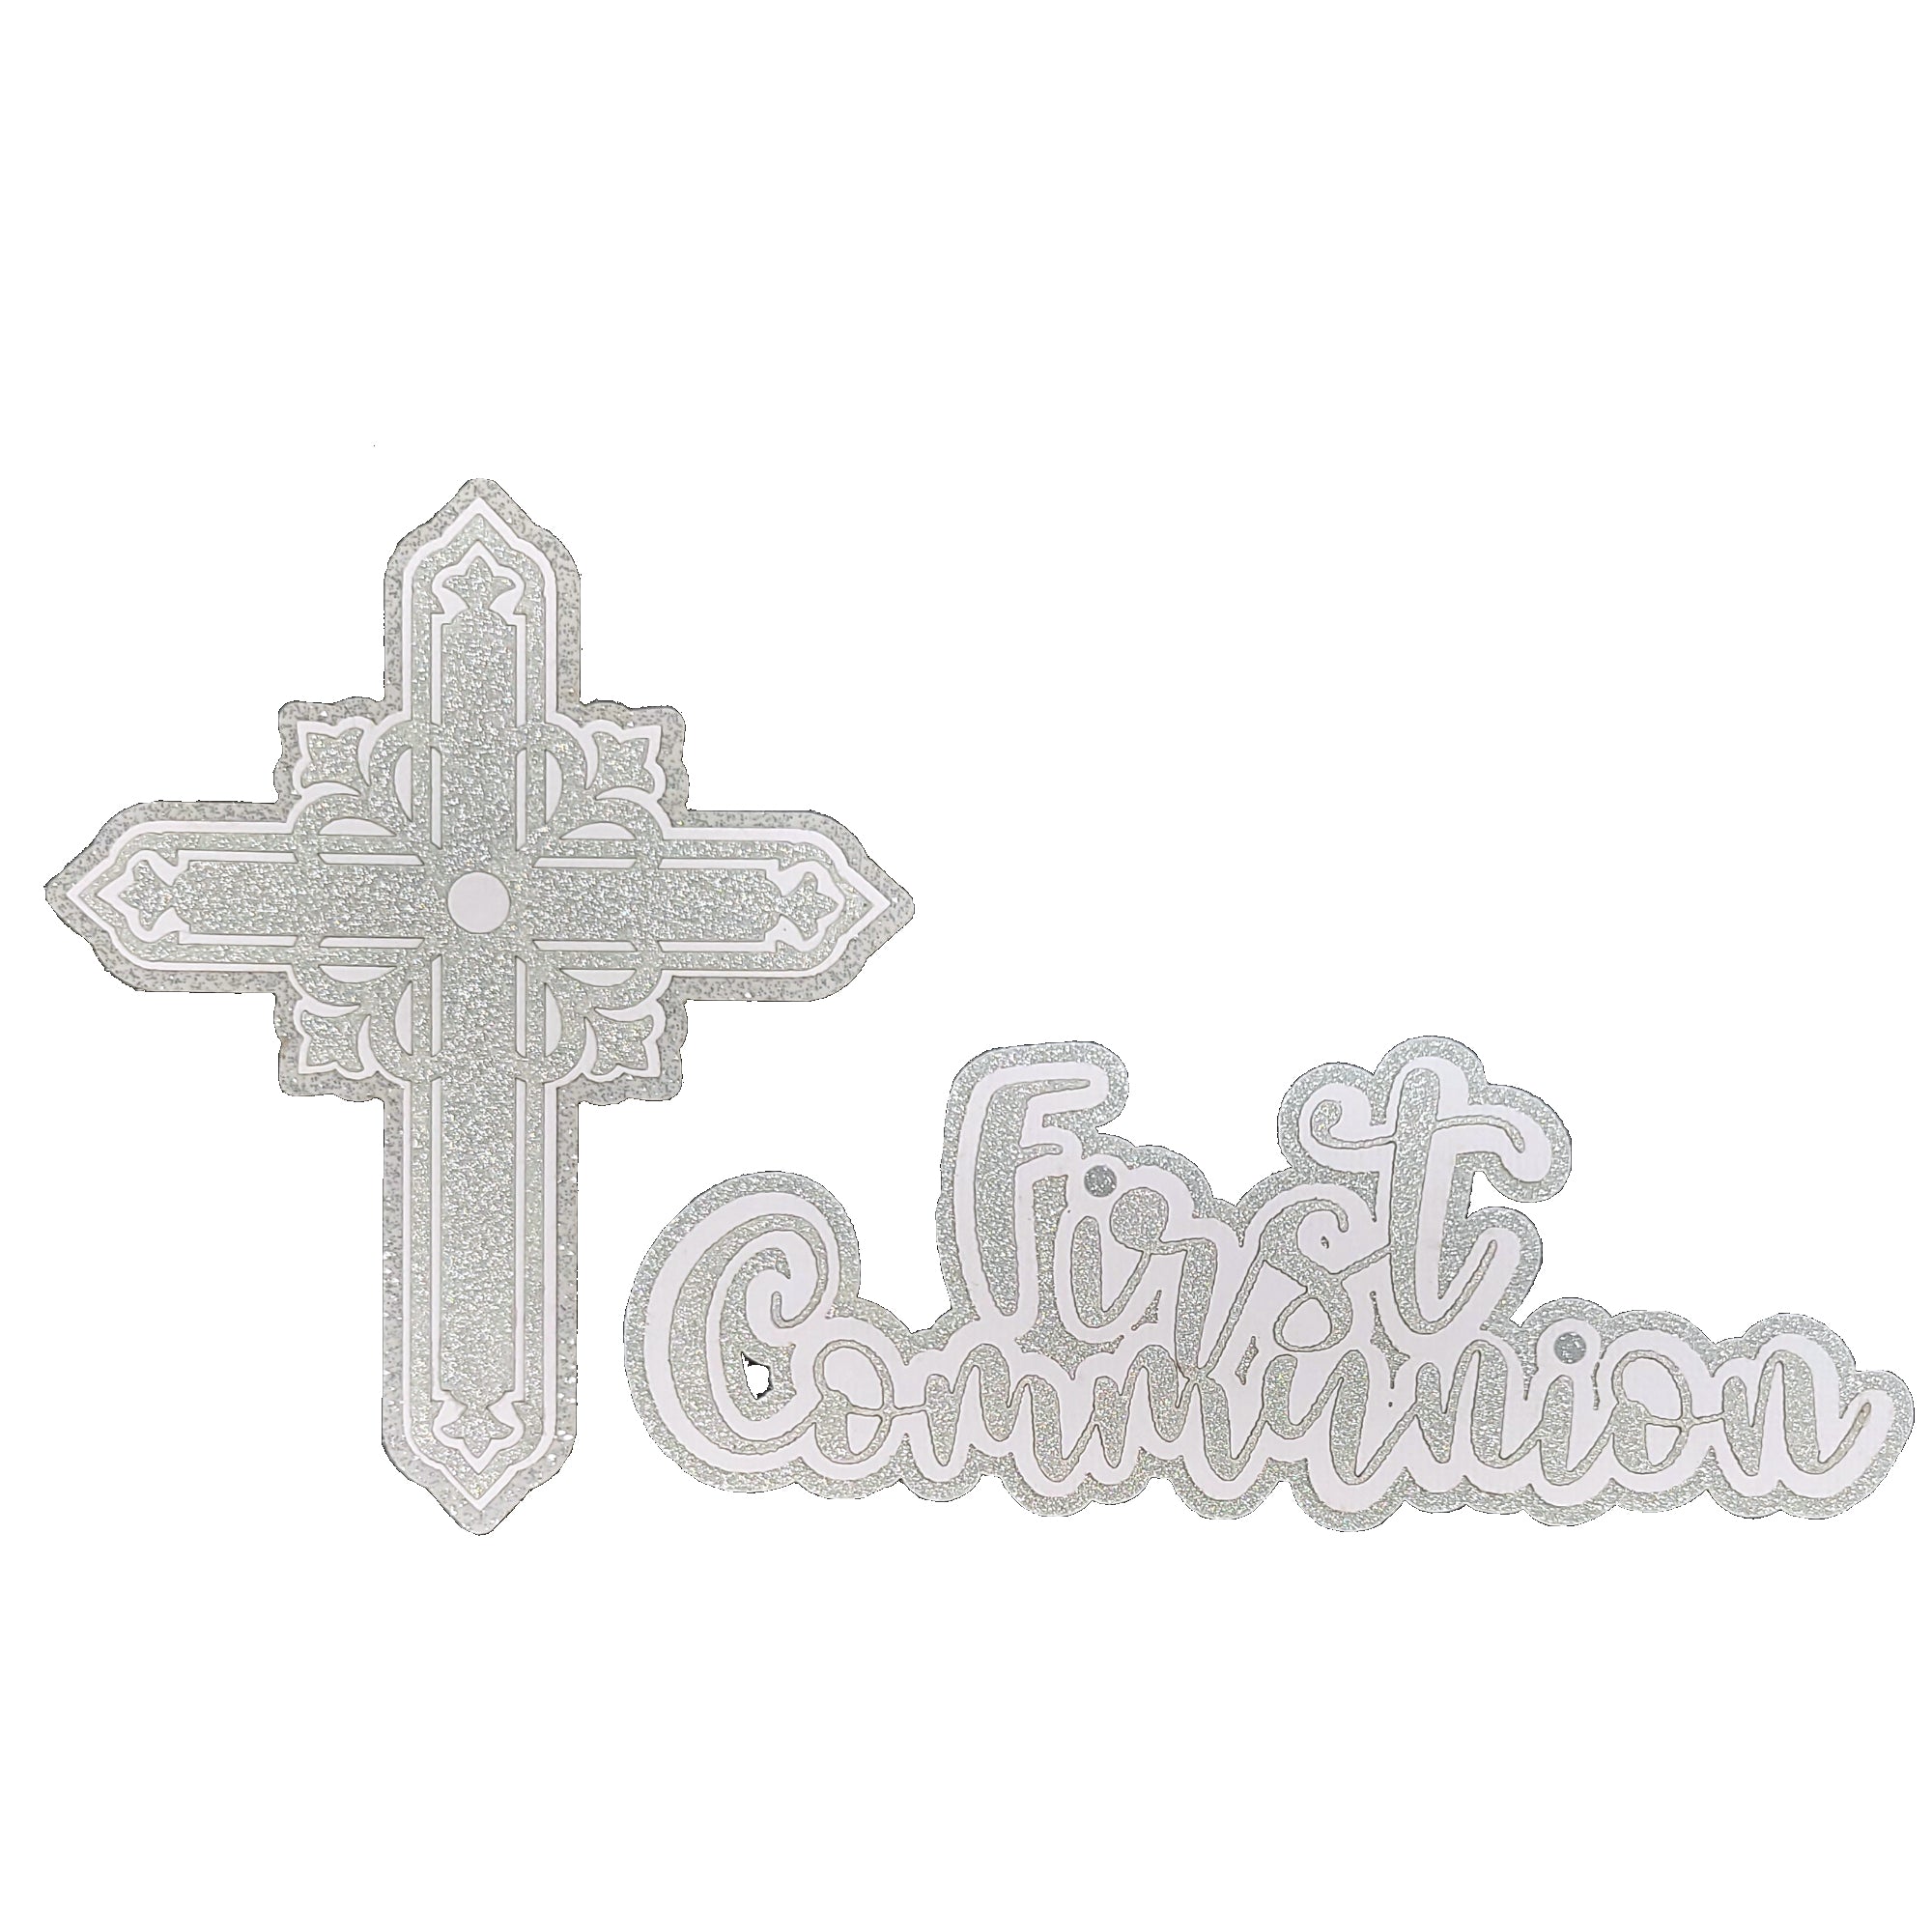 Holy Sacraments Collection First Communion Laser Cut Scrapbook Embellishment by SSC Designs